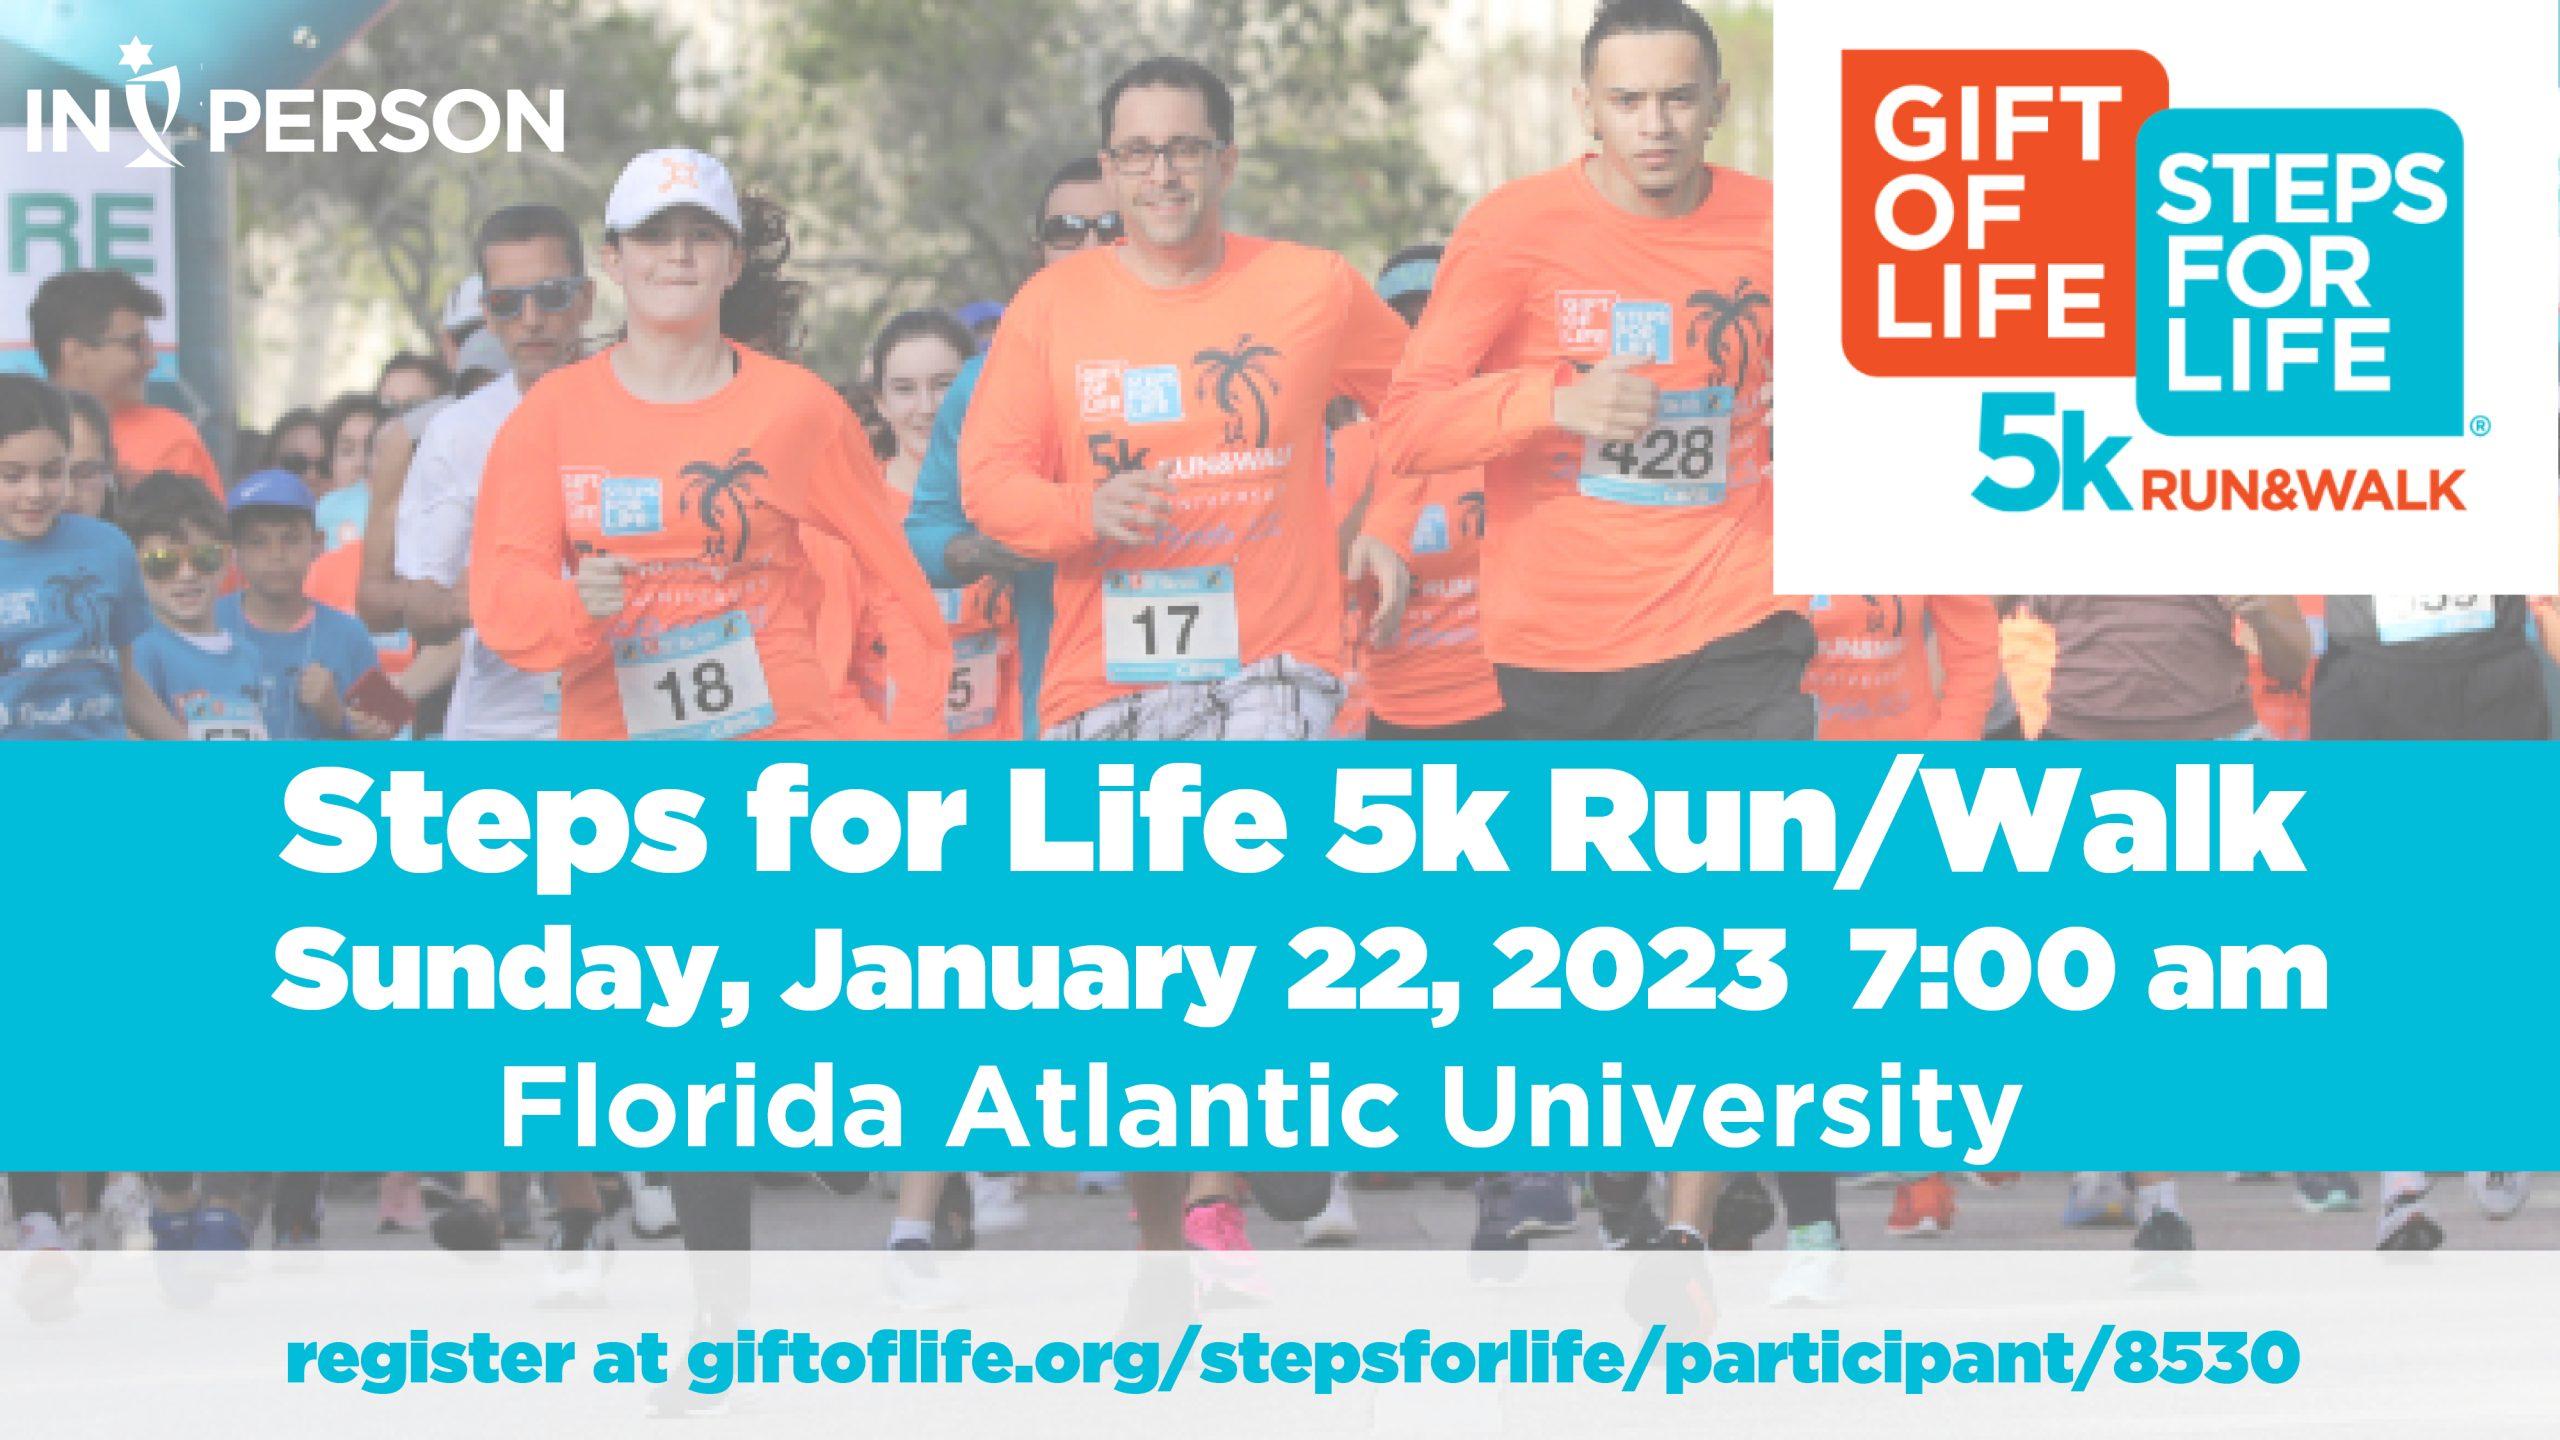 Join Temple Beth El in supporting Gift of Life Marrow Registry at the 2023 Steps for Life 5k Run/Walk in Boca Raton. Led by team leader Debi Jackman